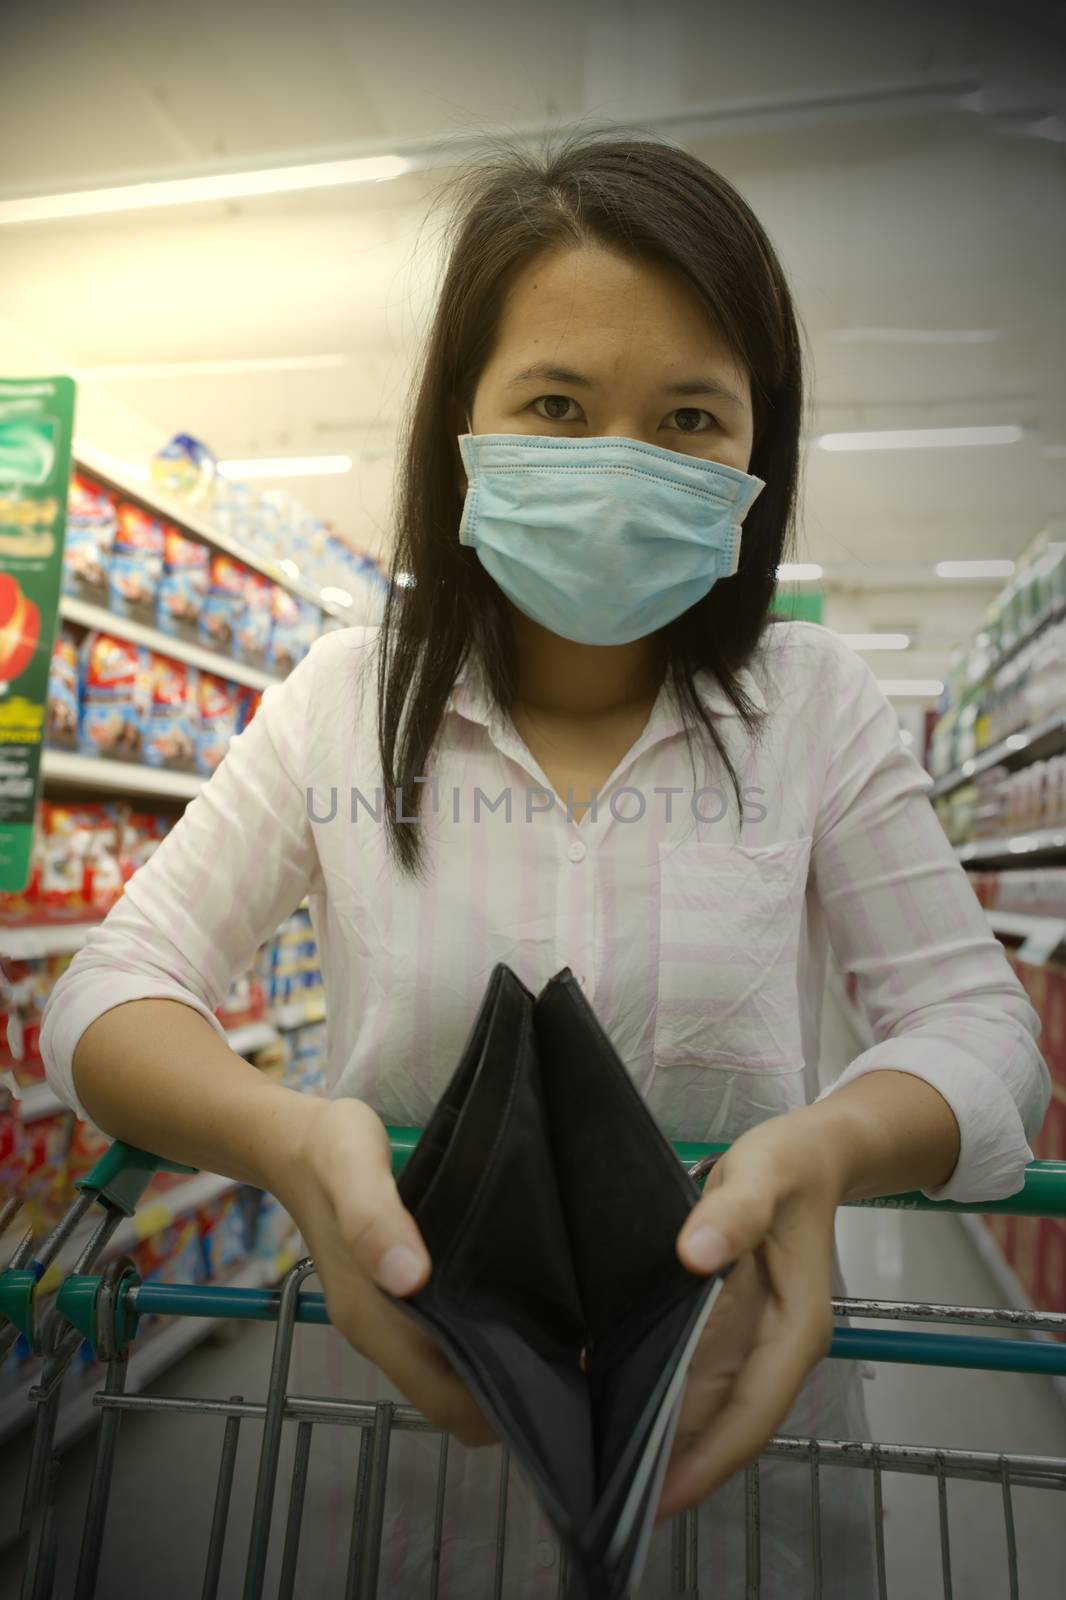 A woman shopping in a mall shows a wallet wearing a mask against the coronavirus select focus.